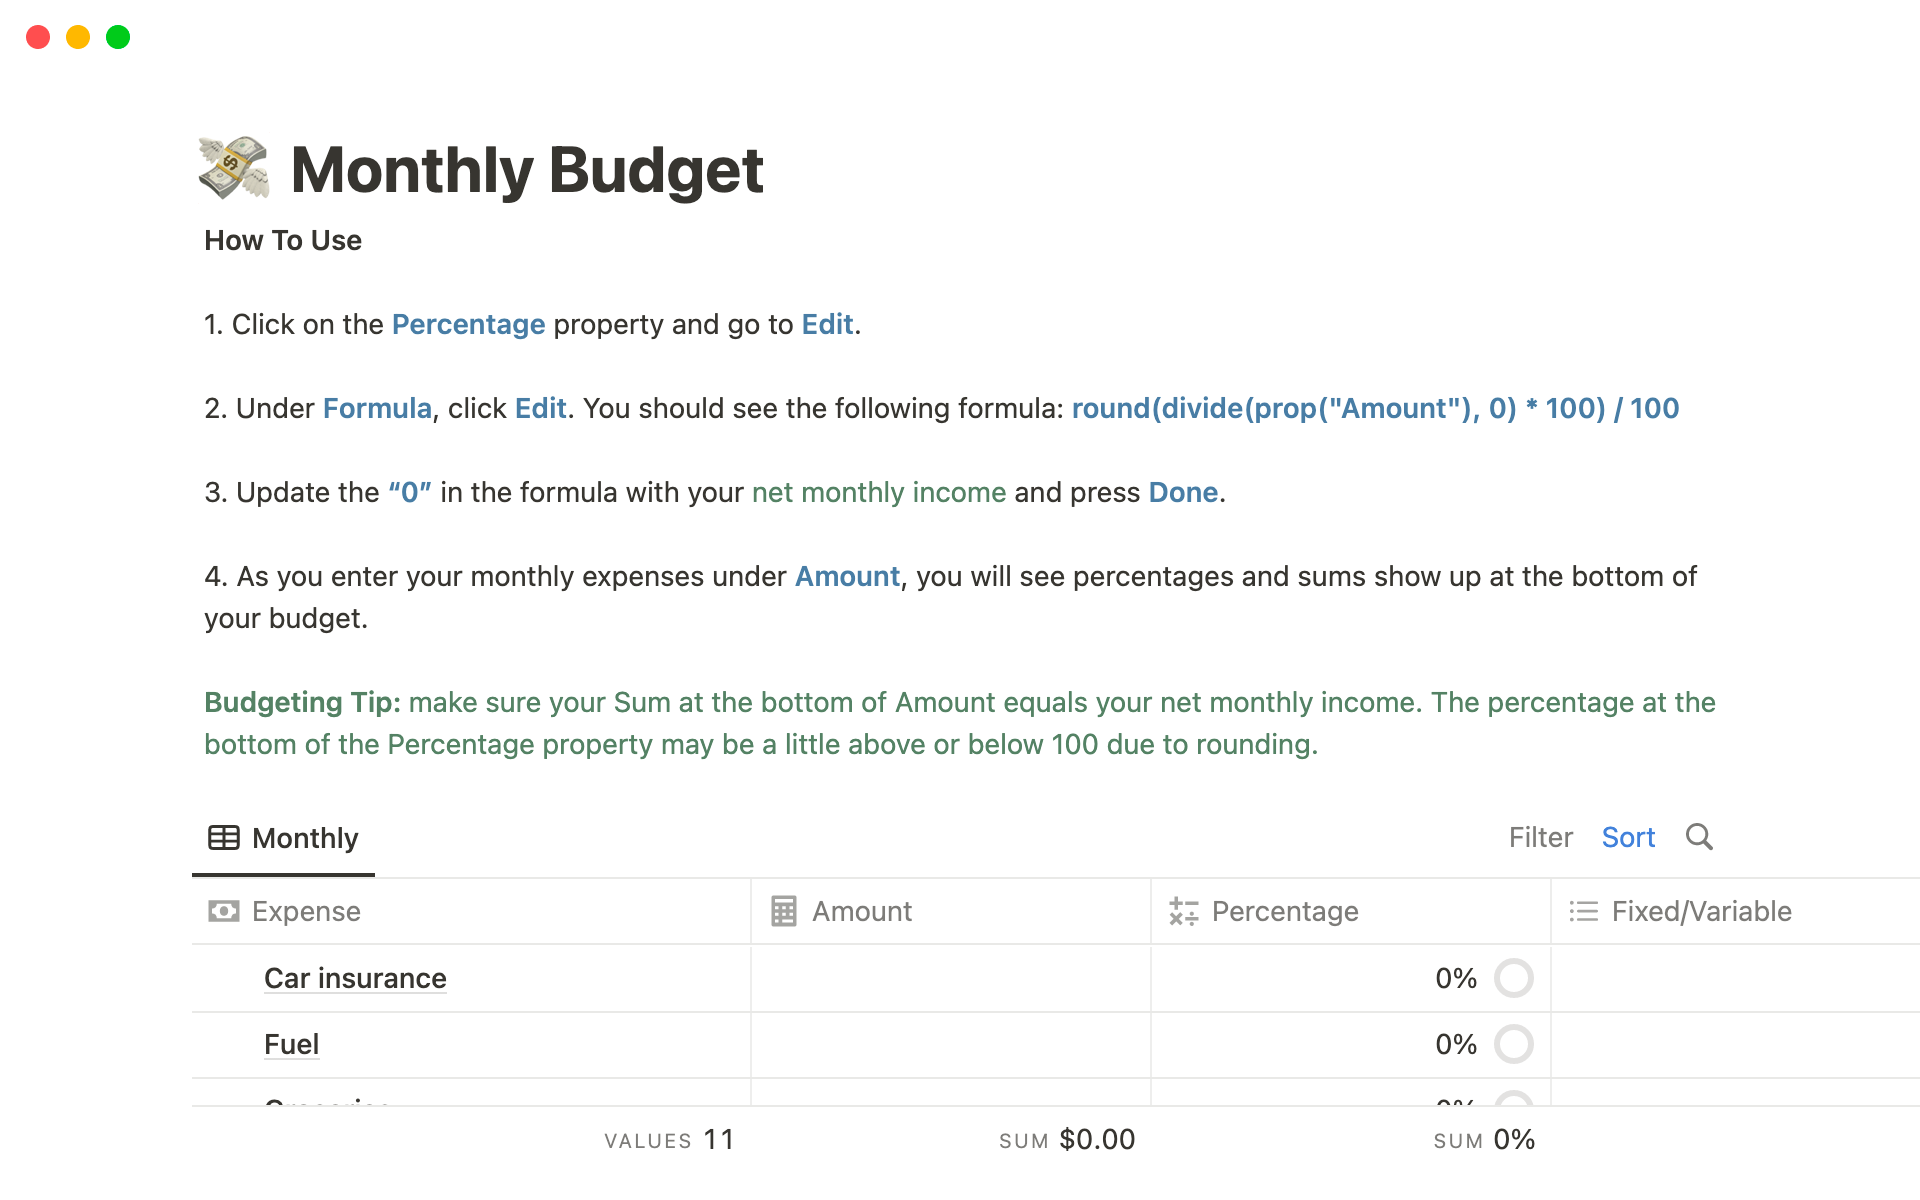 This template allows you to track your monthly budget.